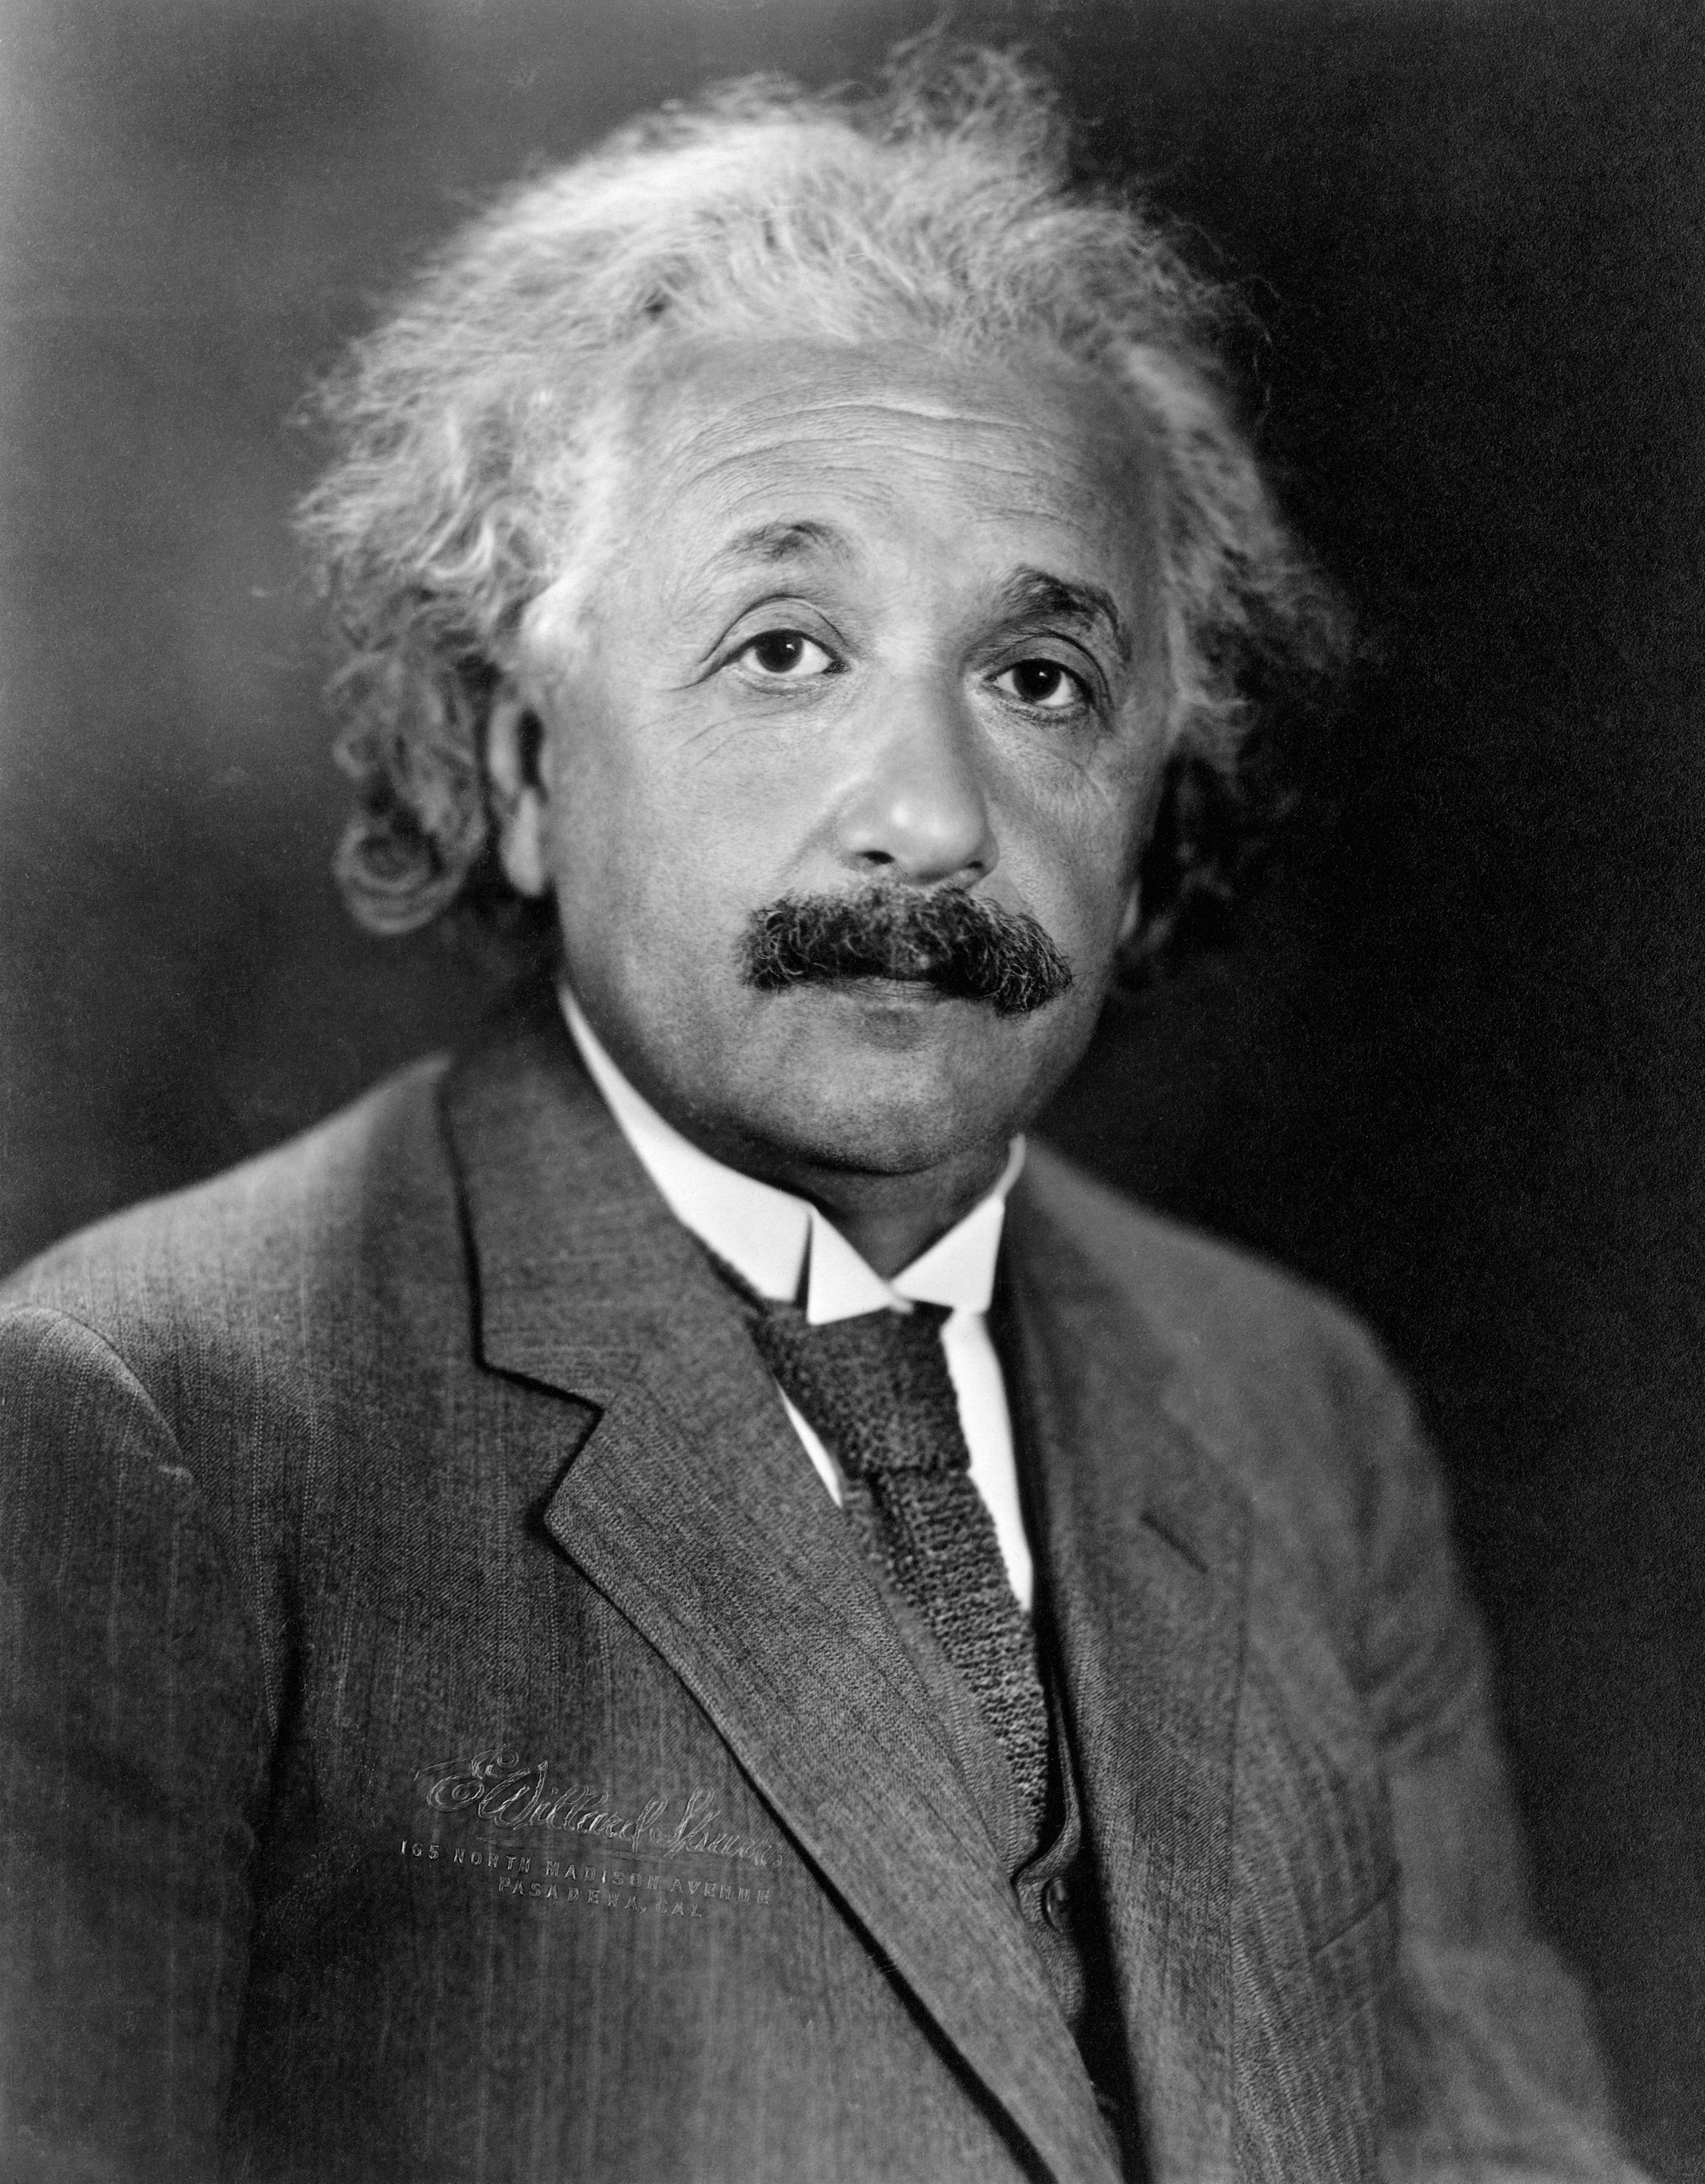 Right to Die: Here's What Albert Einstein Thought | Time